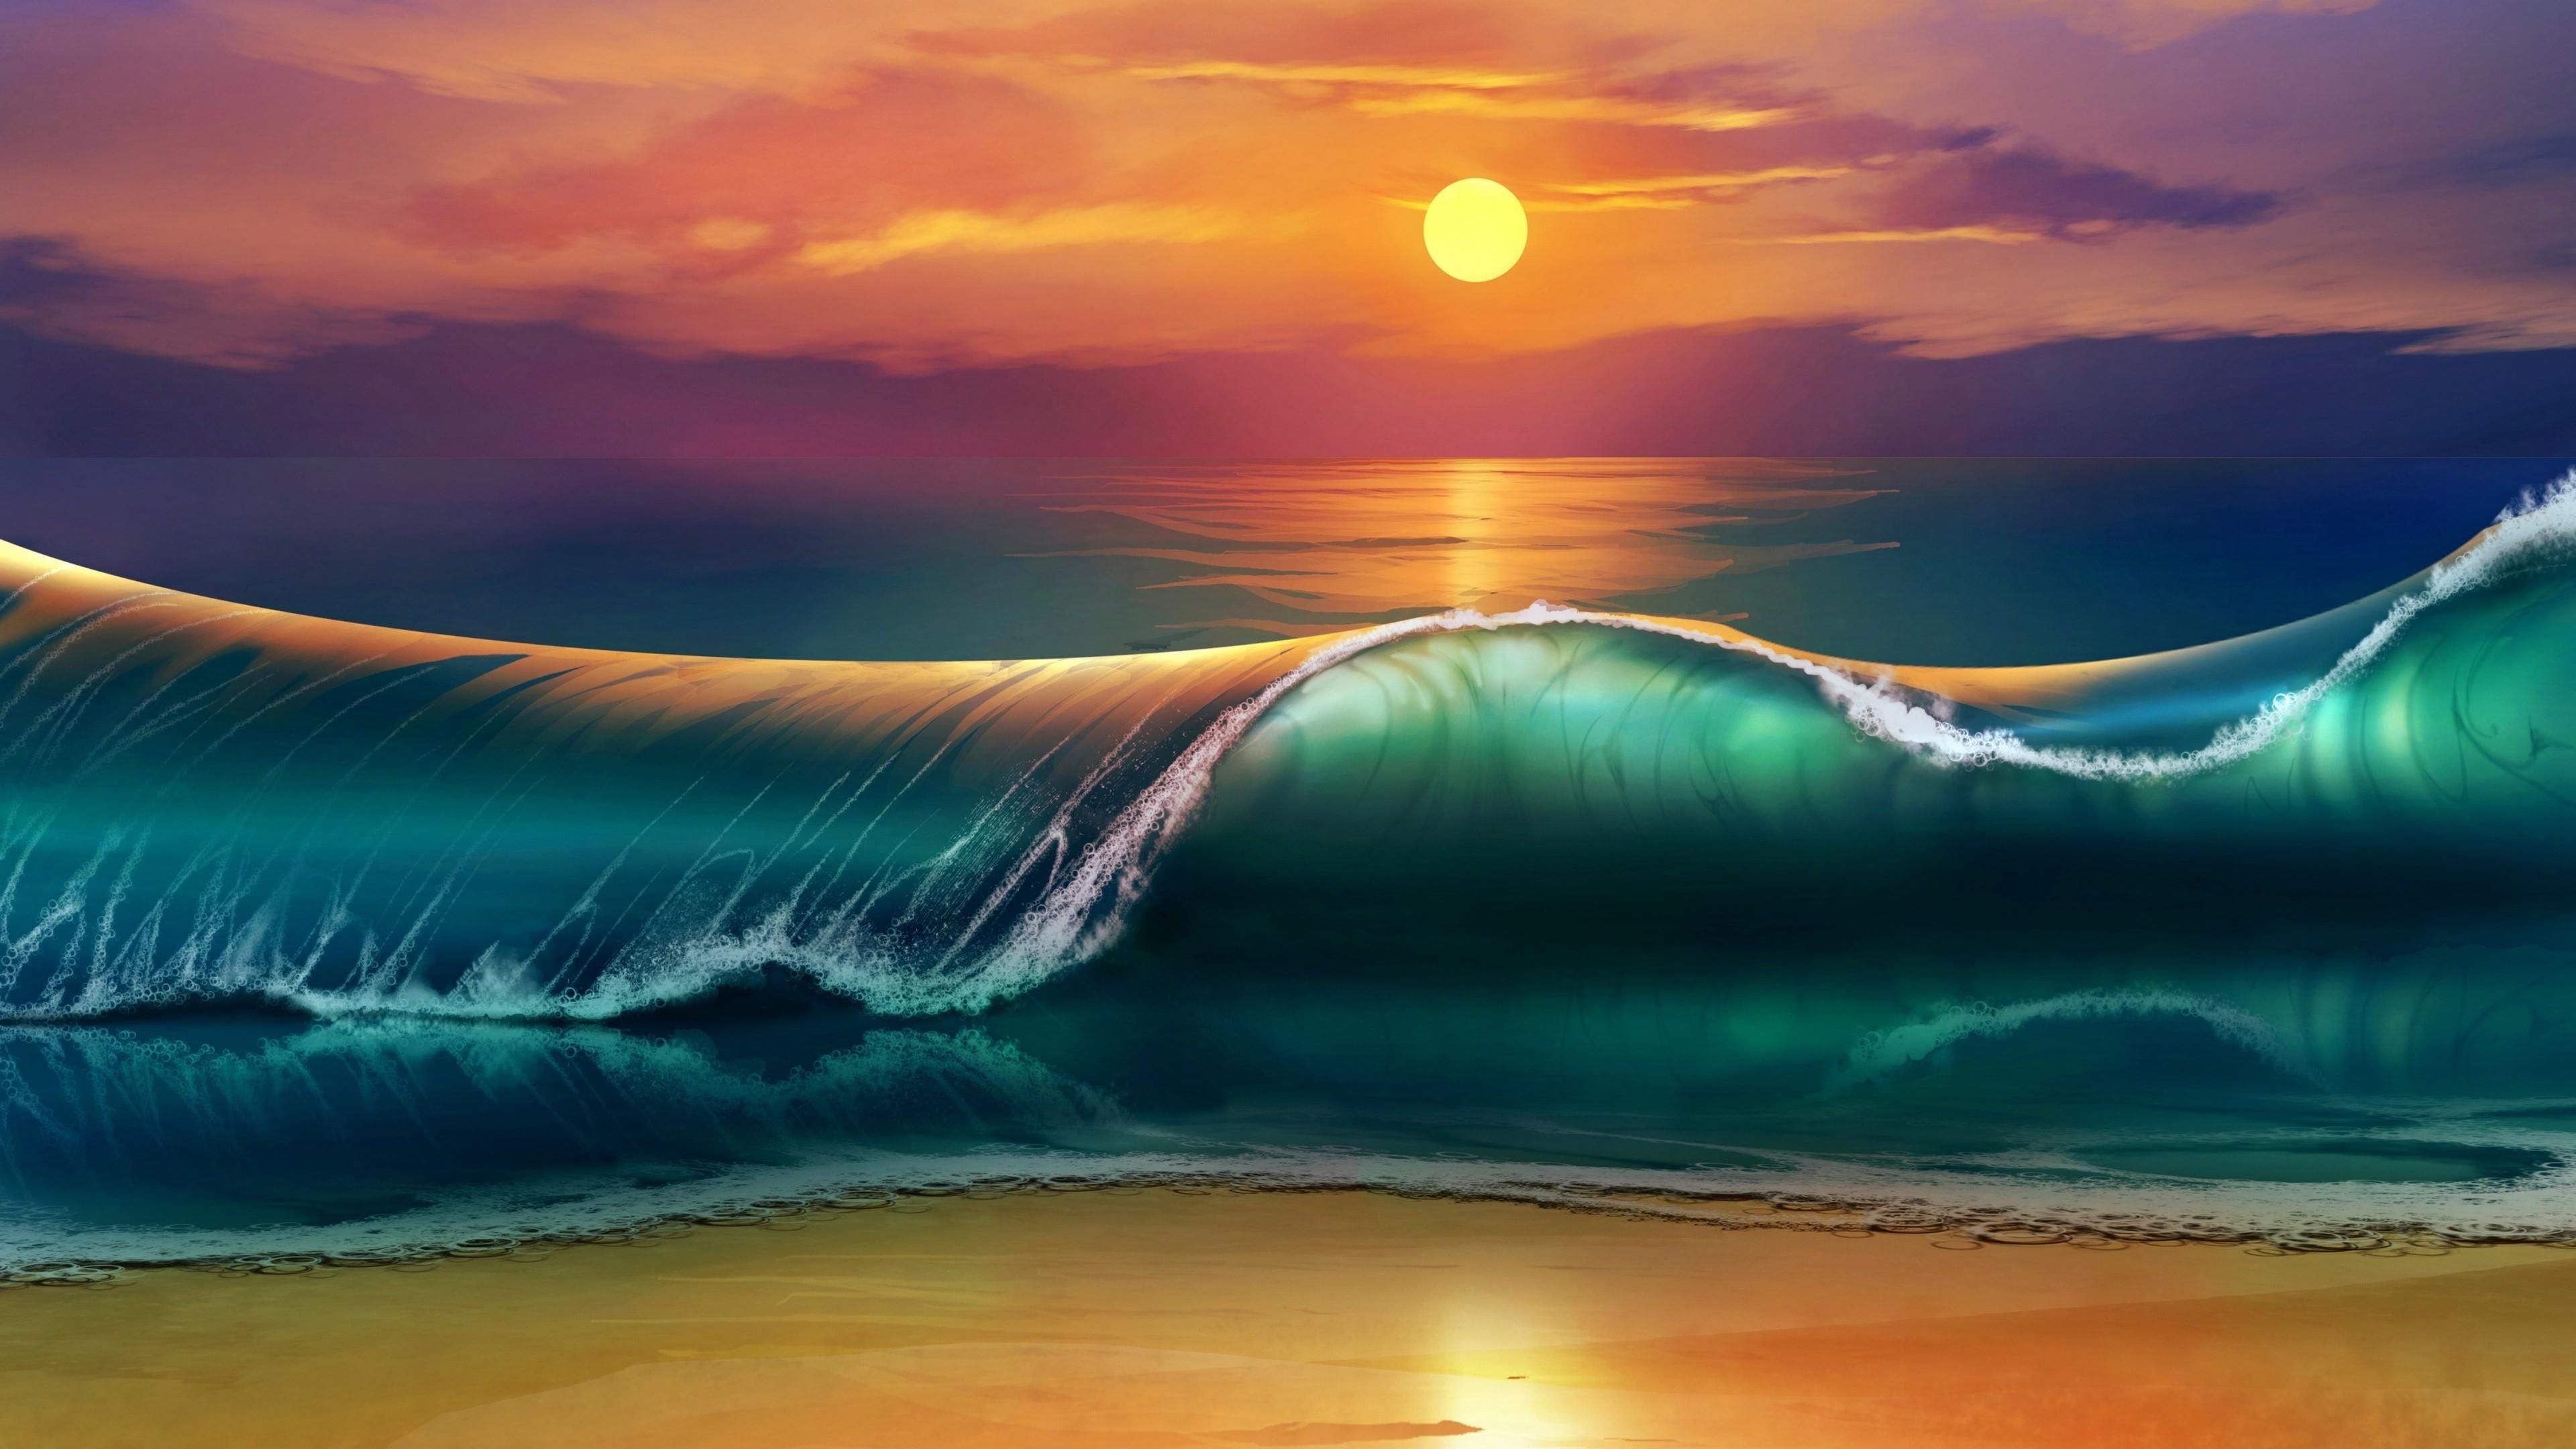 Sunset Sea Waves Beach 4k Ultra Hd Wallpapers For Desktop Mobile Laptop And Tablet 3840x2160 : Wallpapers13